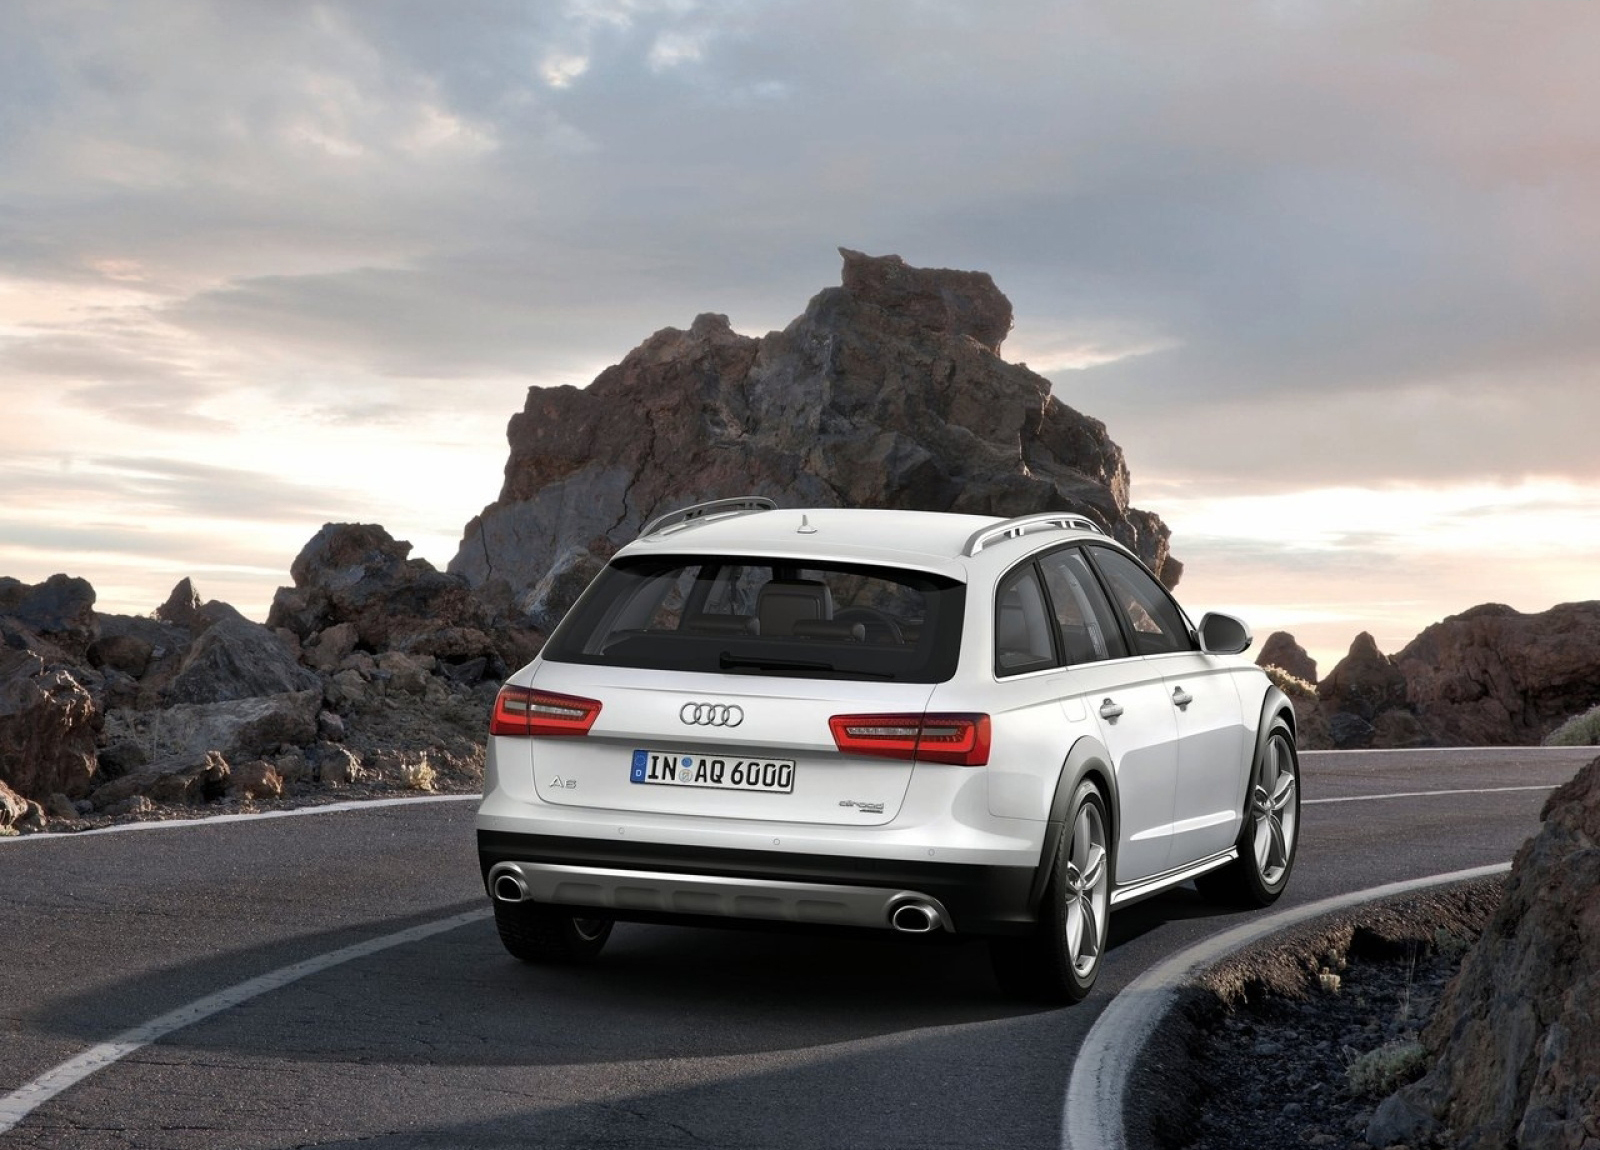 Audi A6 Allroad HD Wallpapers The World of Audi